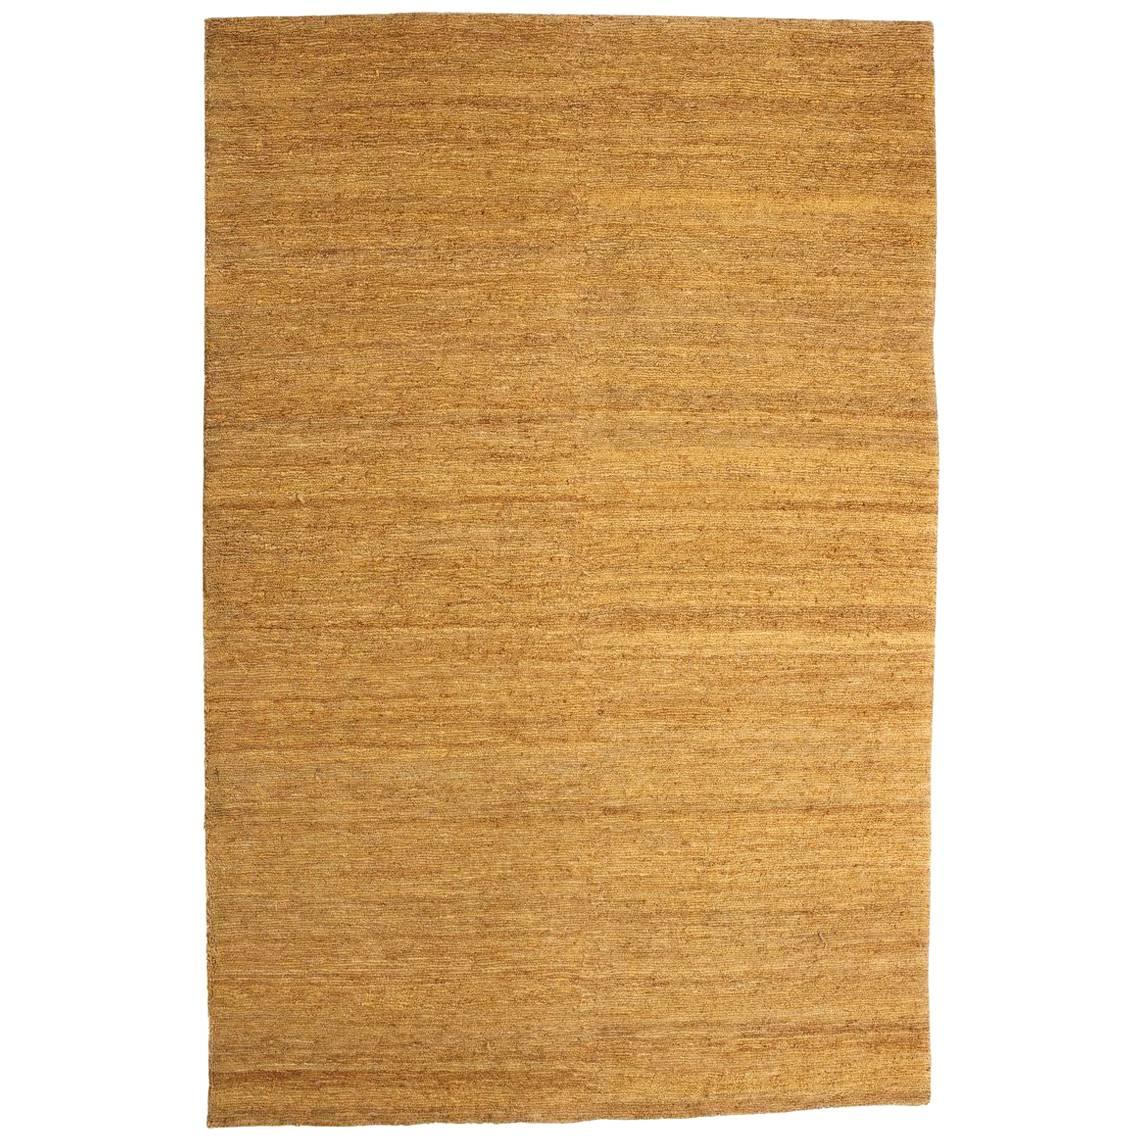  Ochre Earth Rug in Hand-Knotted Jute by Nani Marquina & Ariadna Miquel, Medium For Sale